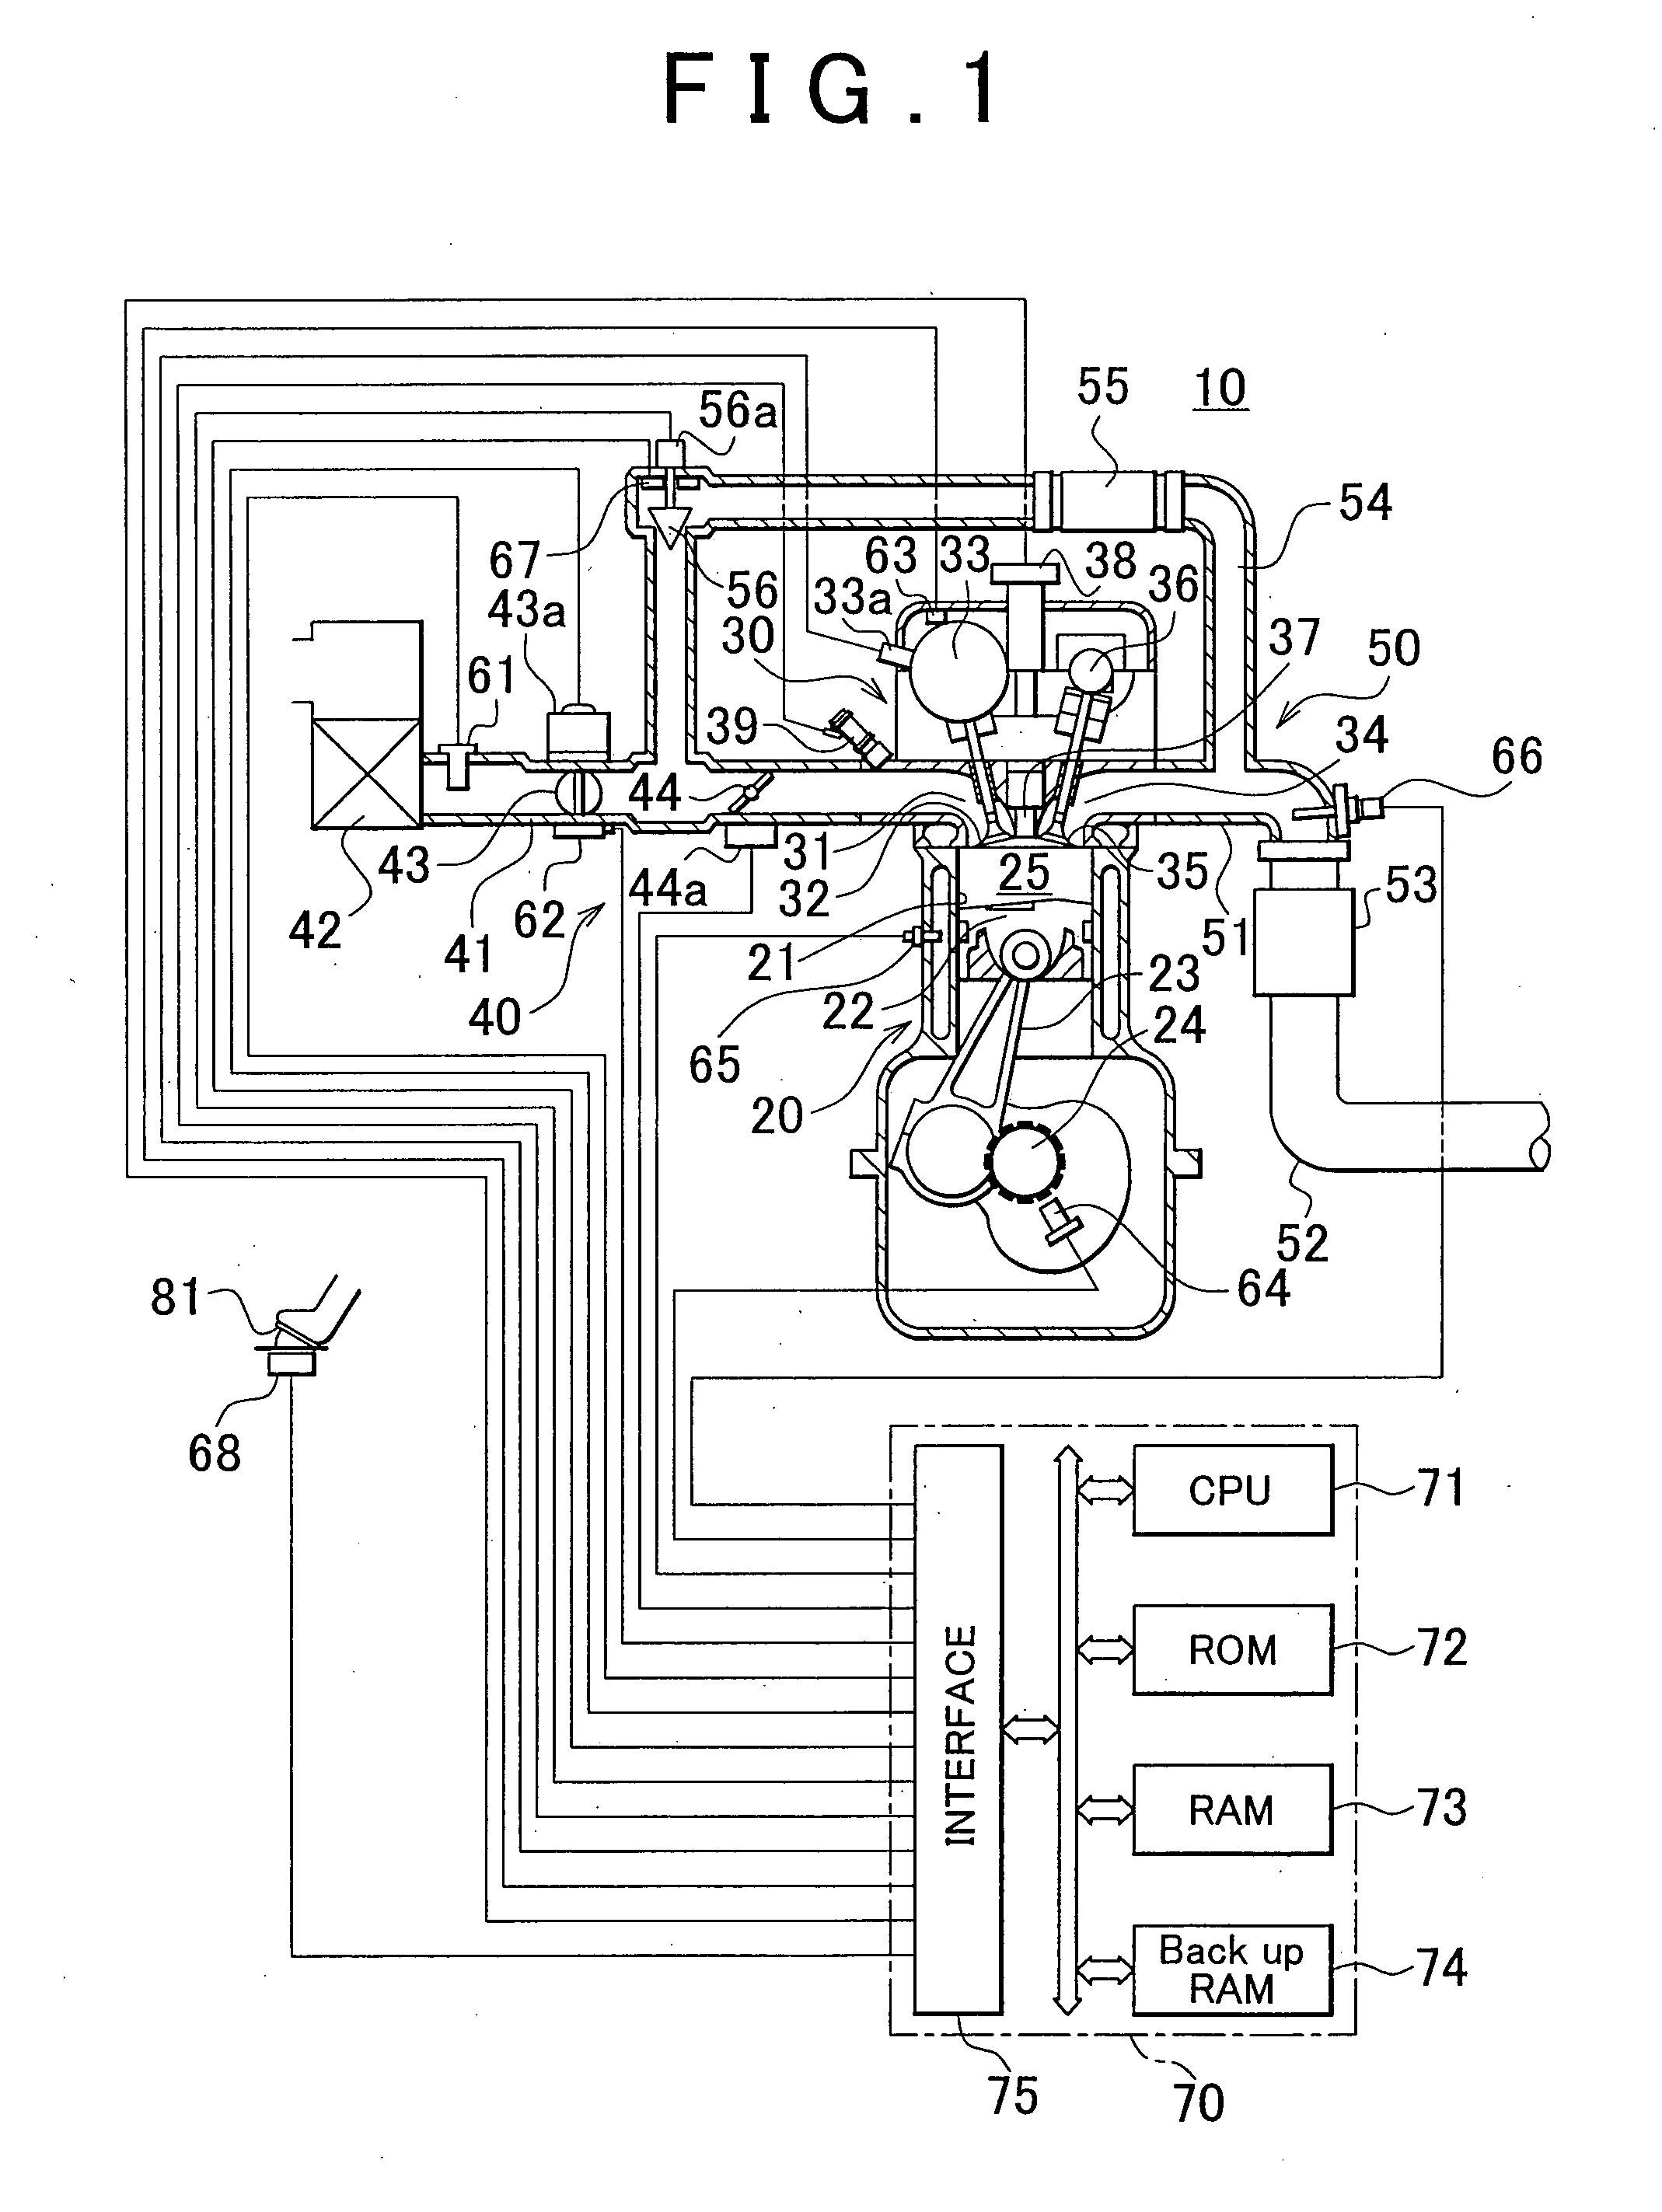 Ignition timing control apparatus and method for internal combustion engine